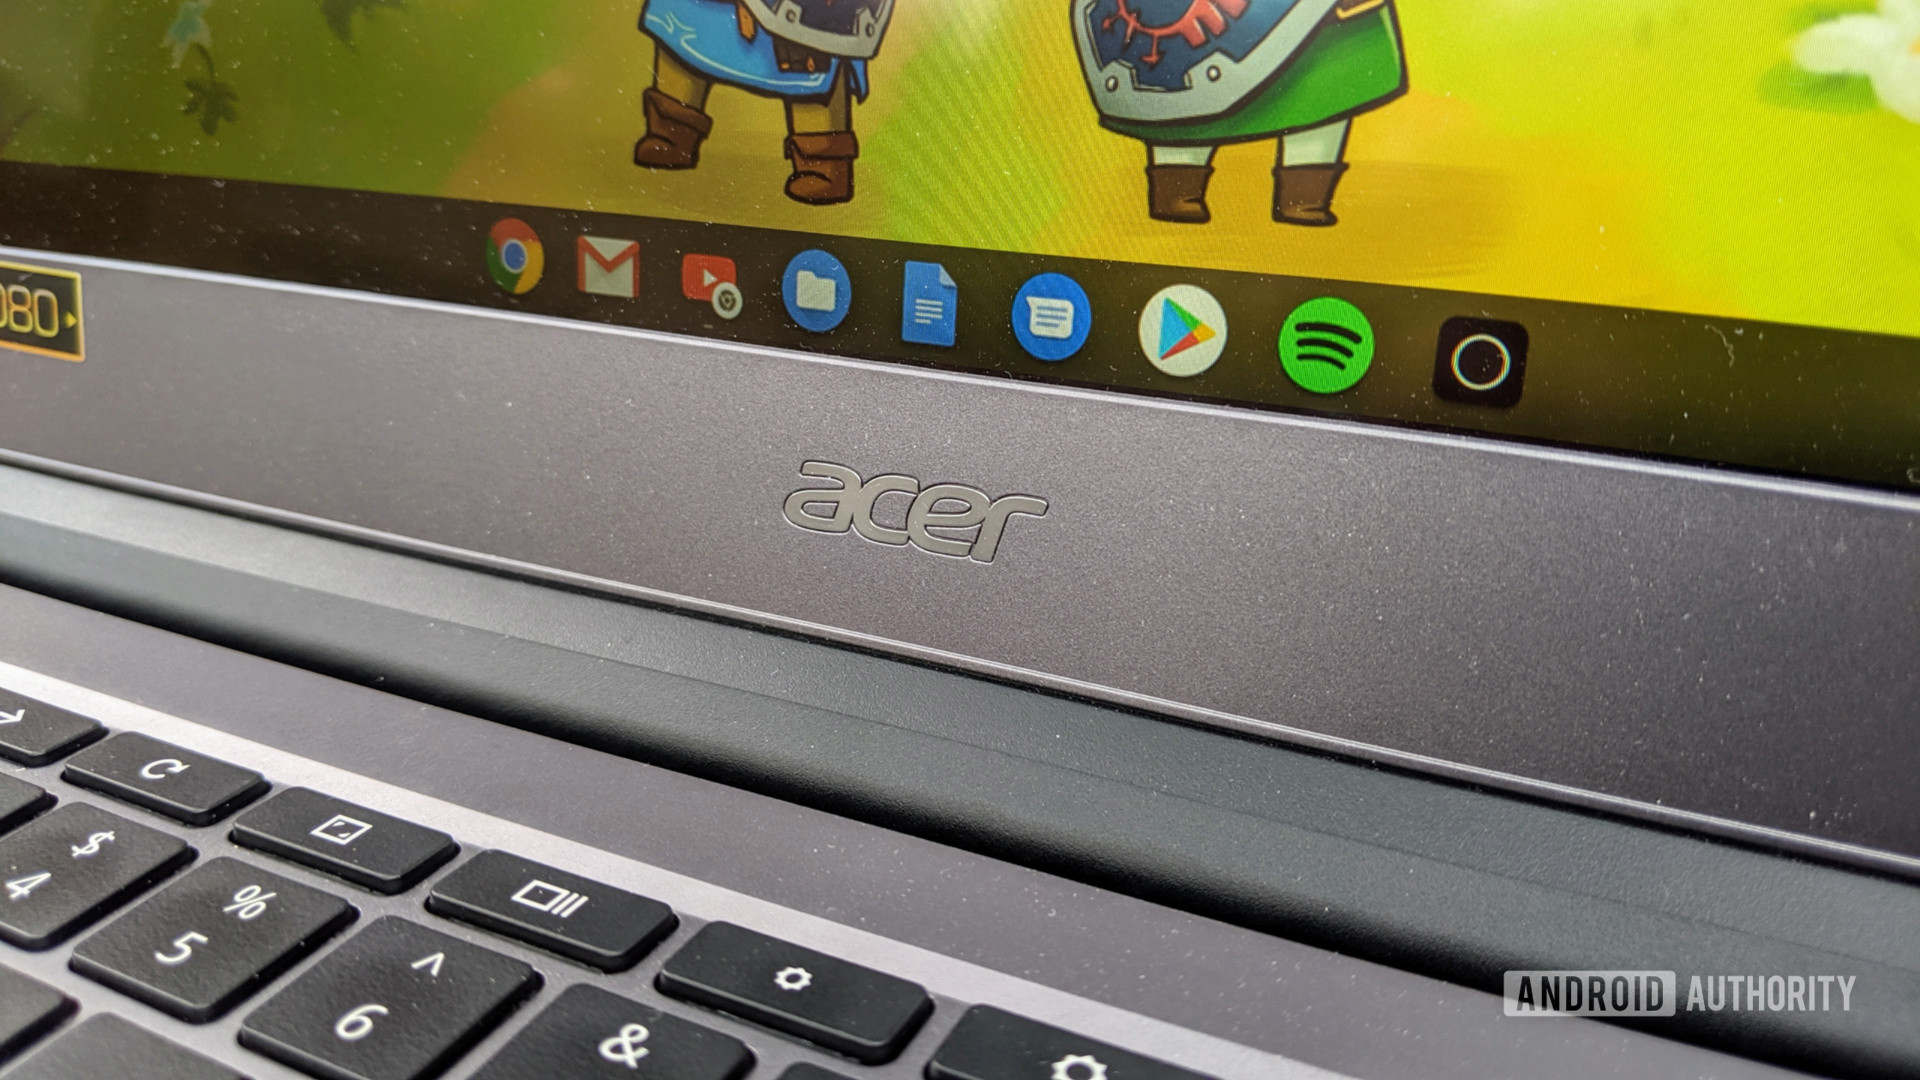 Close up of the Acer logo on the Acer Chromebook 714